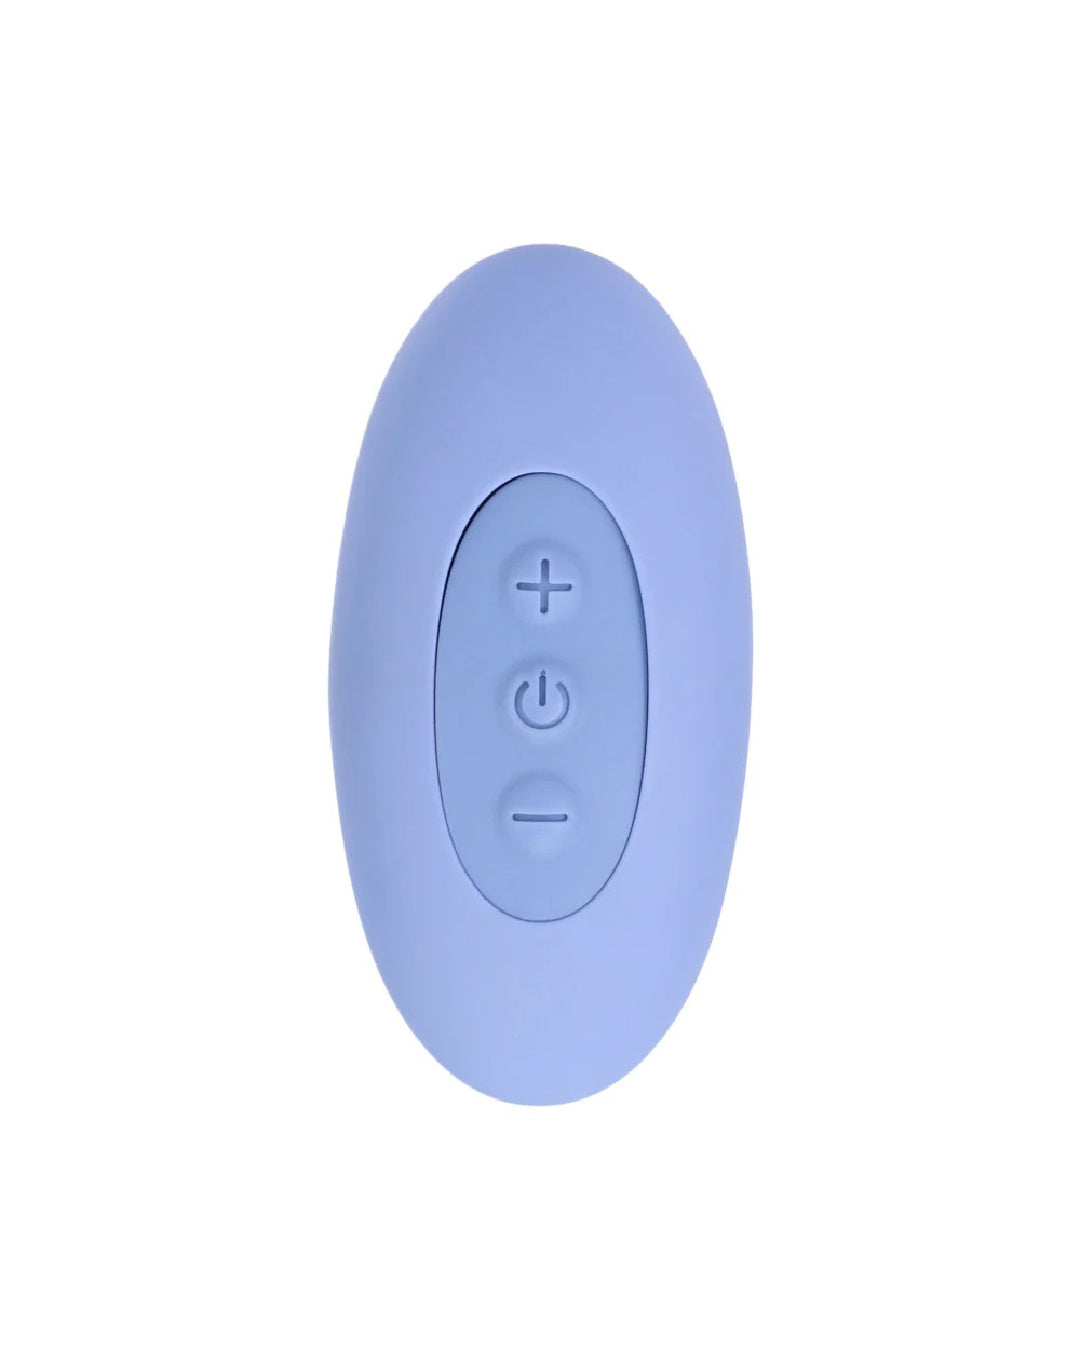 Tryst Duet Double Ended Vibrator with Remote - Remote control, top + button increases speed, middle power button turns it on and off and lowest - button lowers the speed